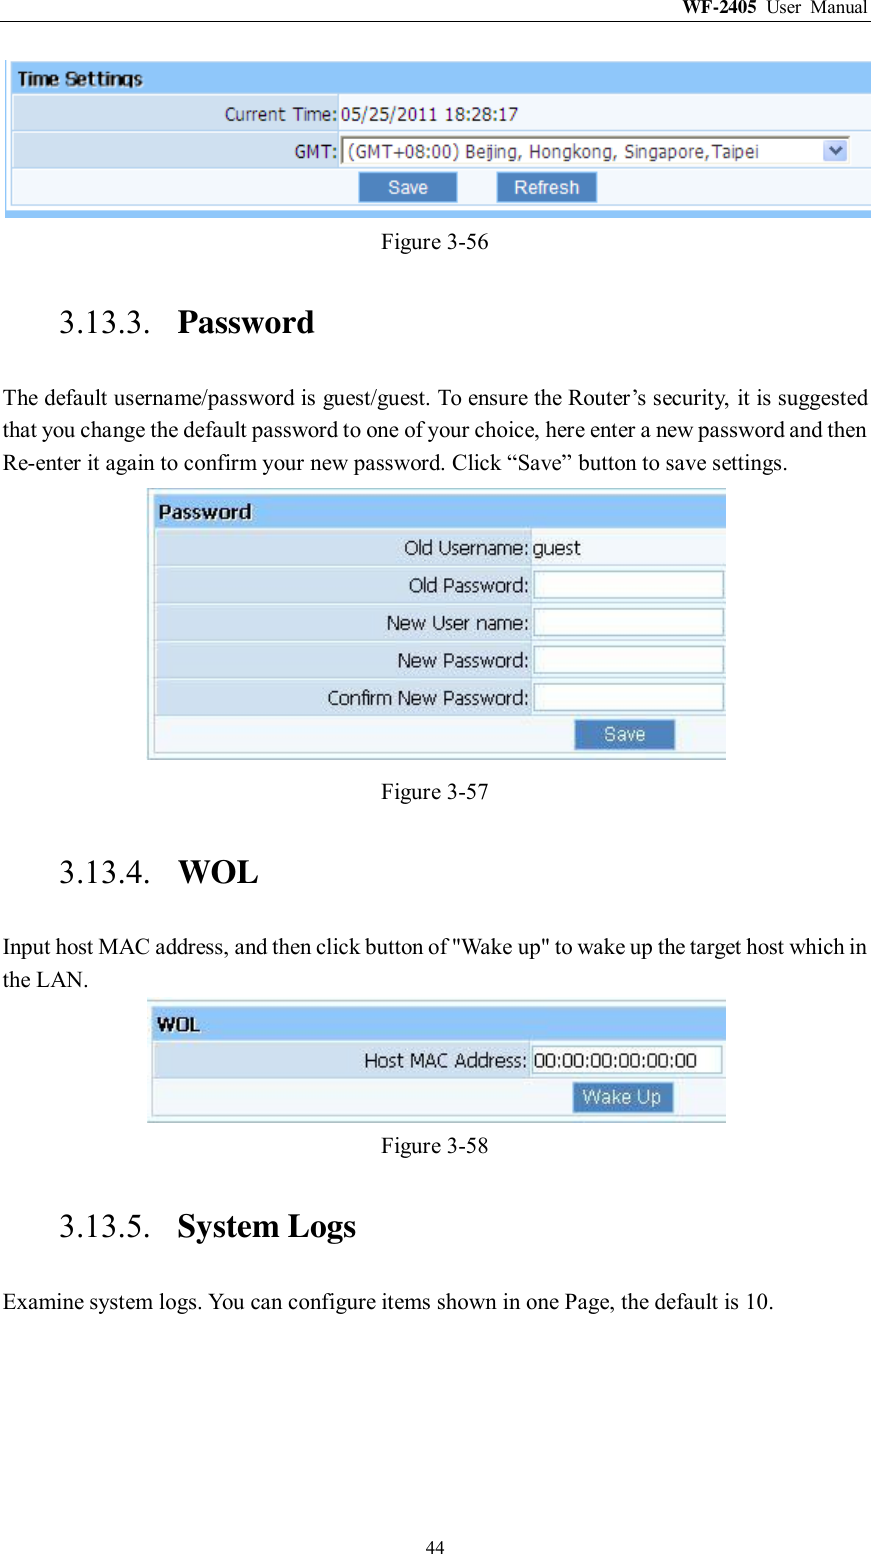 WF-2405  User  Manual  44  Figure 3-56 3.13.3. Password The default username/password is guest/guest. To ensure the Router‟s security, it is suggested that you change the default password to one of your choice, here enter a new password and then Re-enter it again to confirm your new password. Click “Save” button to save settings.  Figure 3-57 3.13.4. WOL Input host MAC address, and then click button of &quot;Wake up&quot; to wake up the target host which in the LAN.  Figure 3-58 3.13.5. System Logs Examine system logs. You can configure items shown in one Page, the default is 10. 